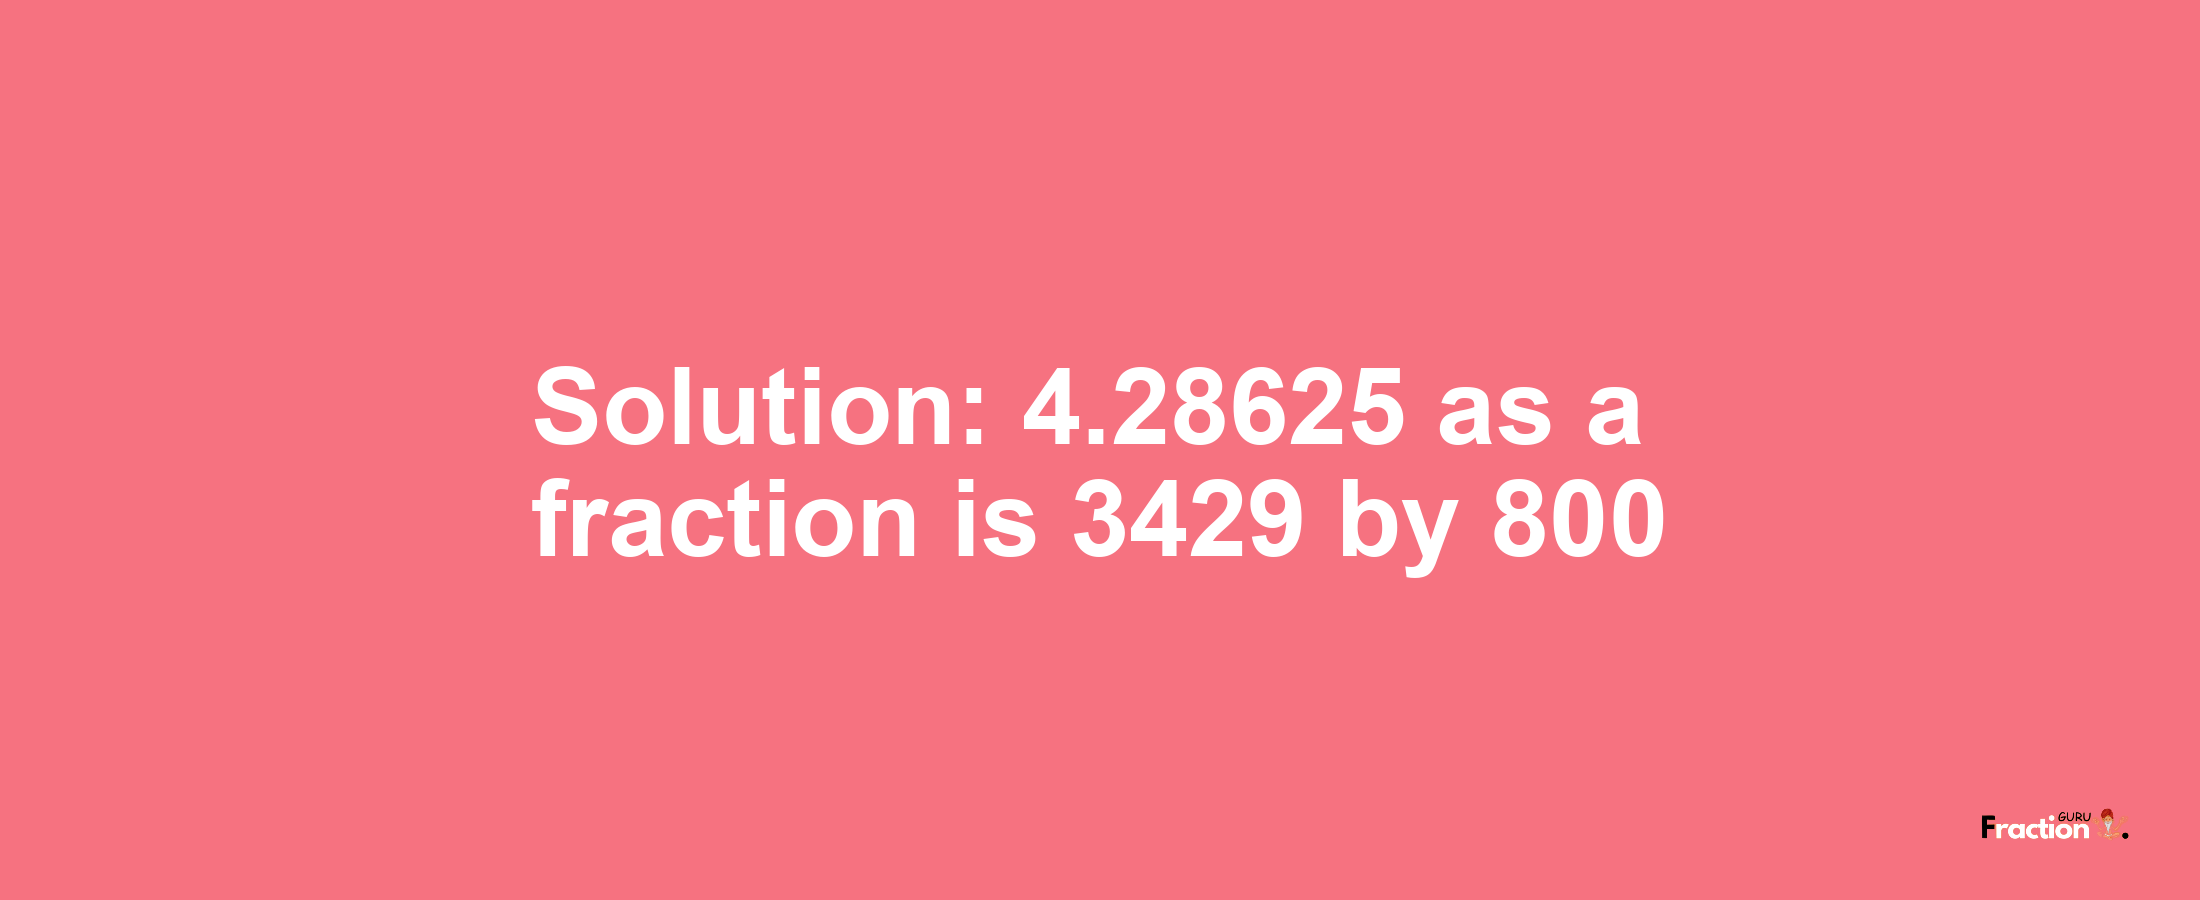 Solution:4.28625 as a fraction is 3429/800